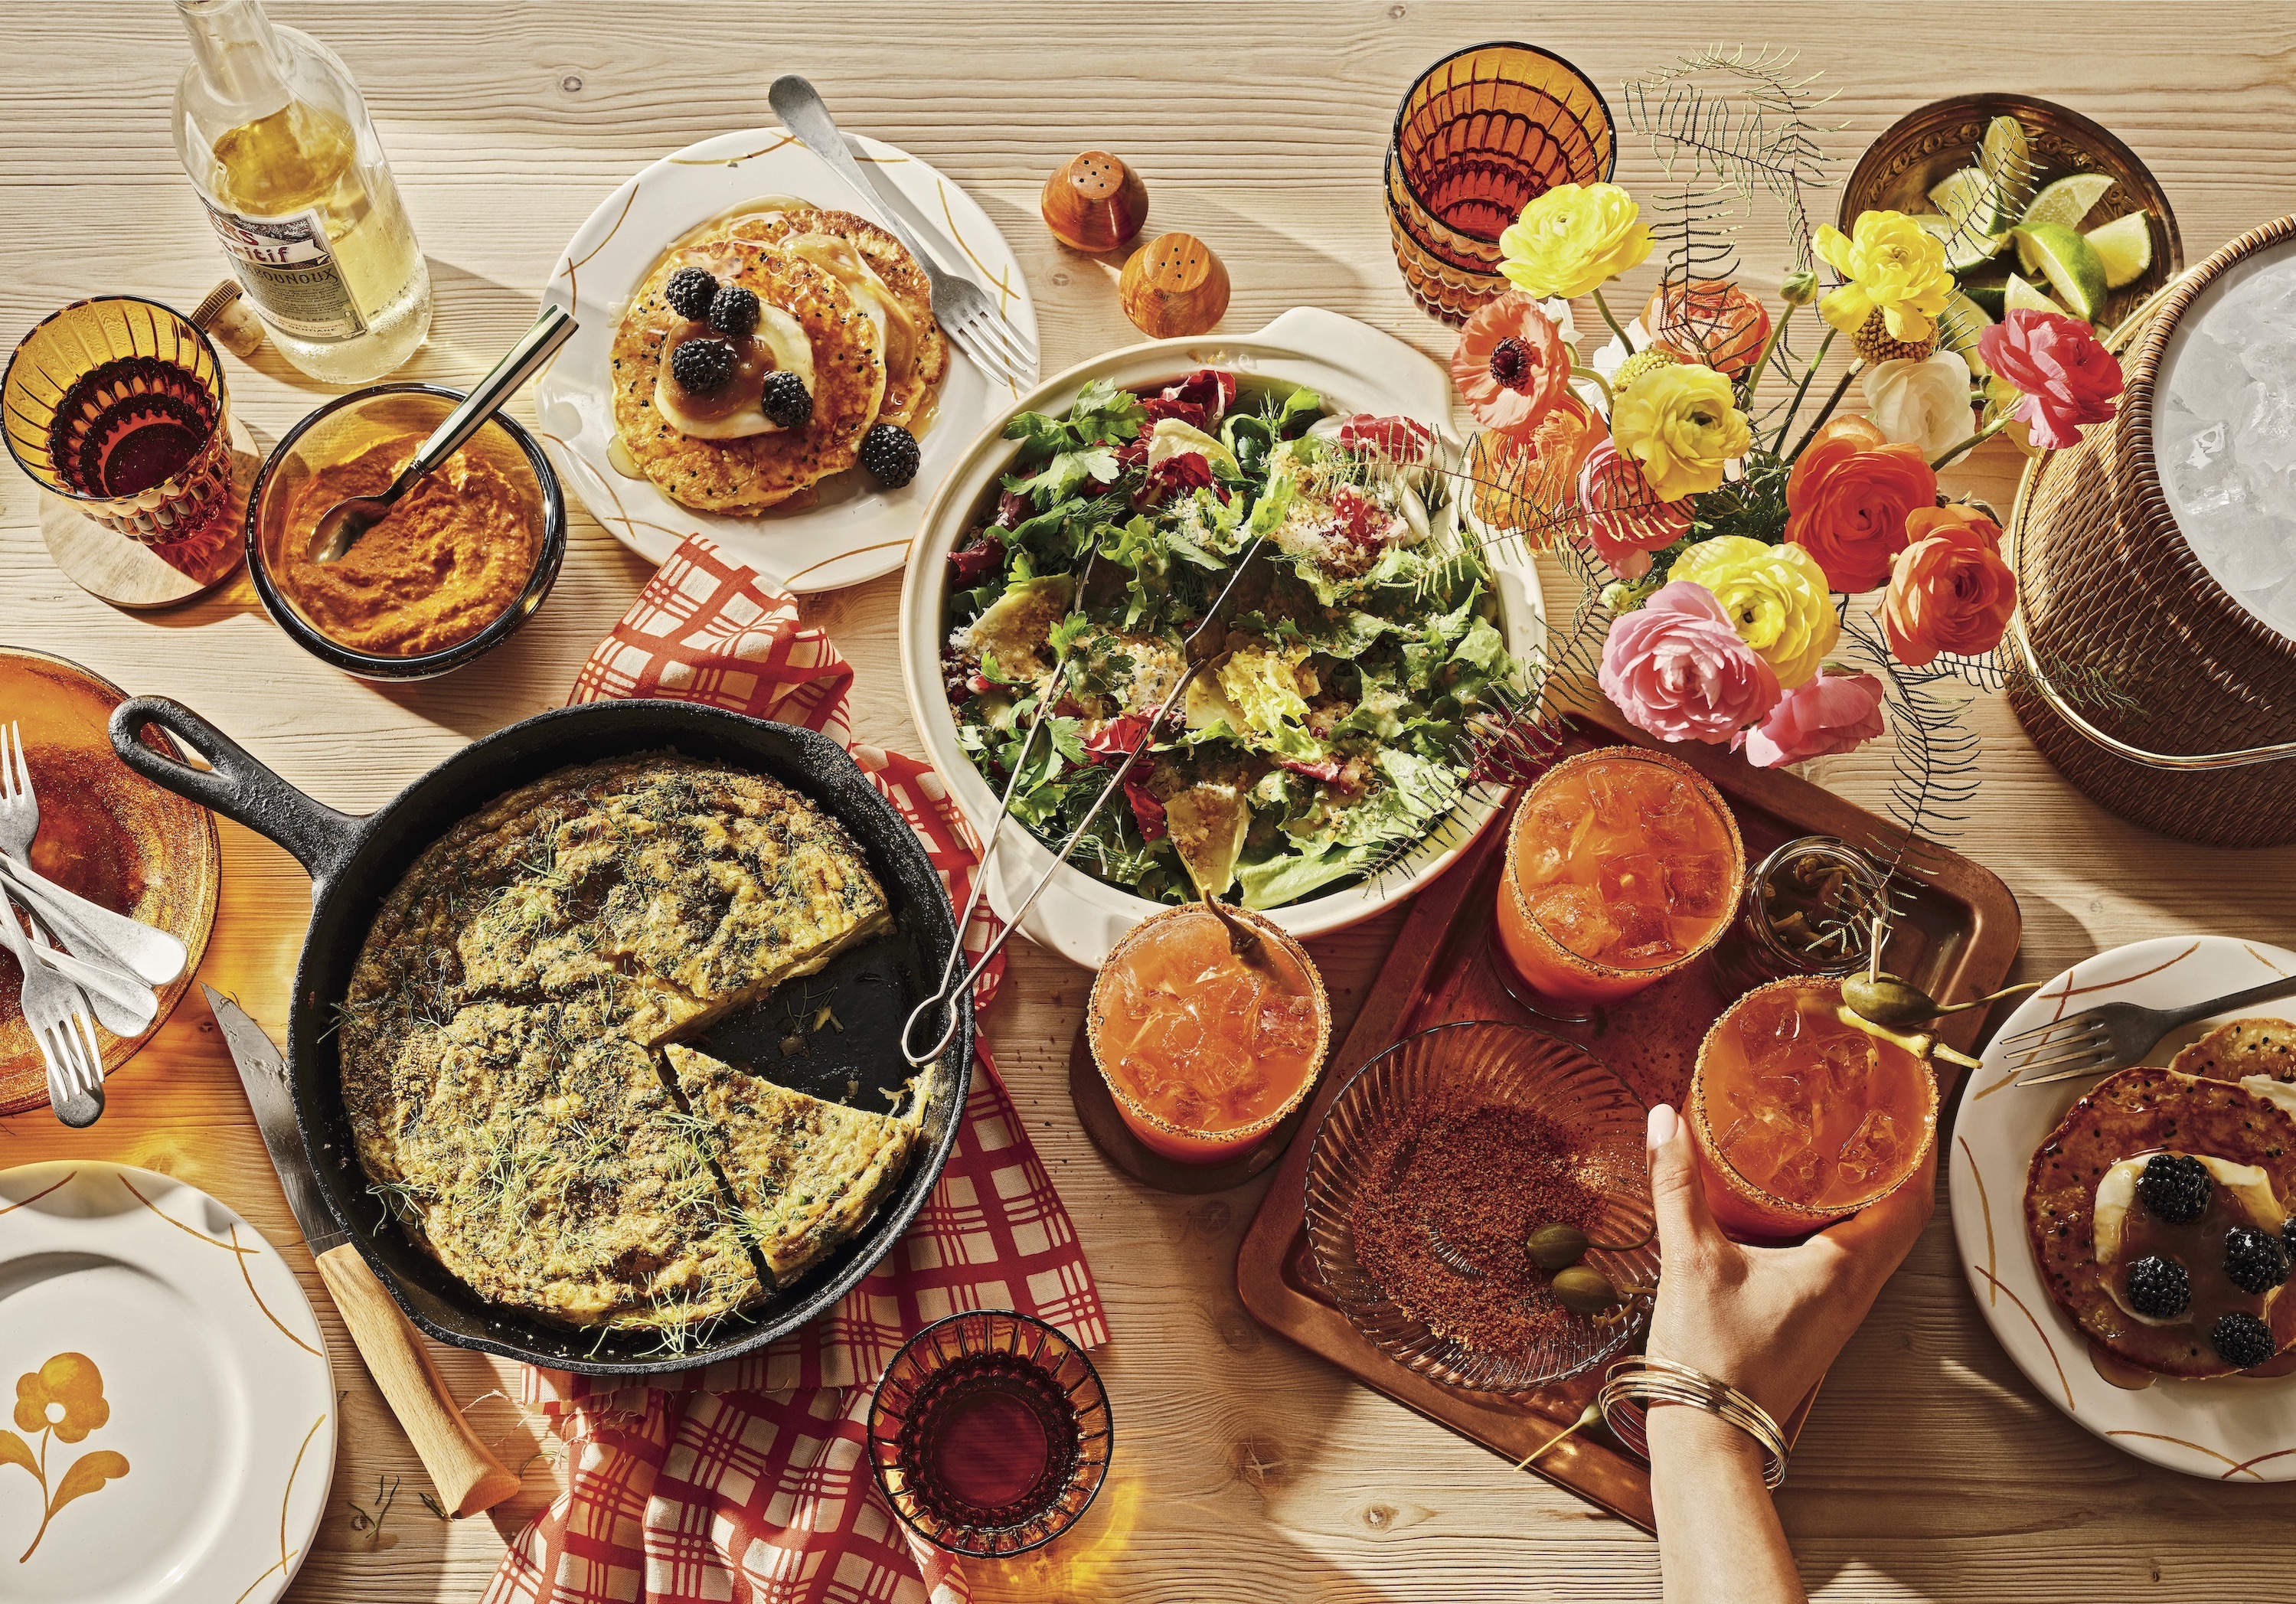 How to Build the Ultimate Brunch Spread